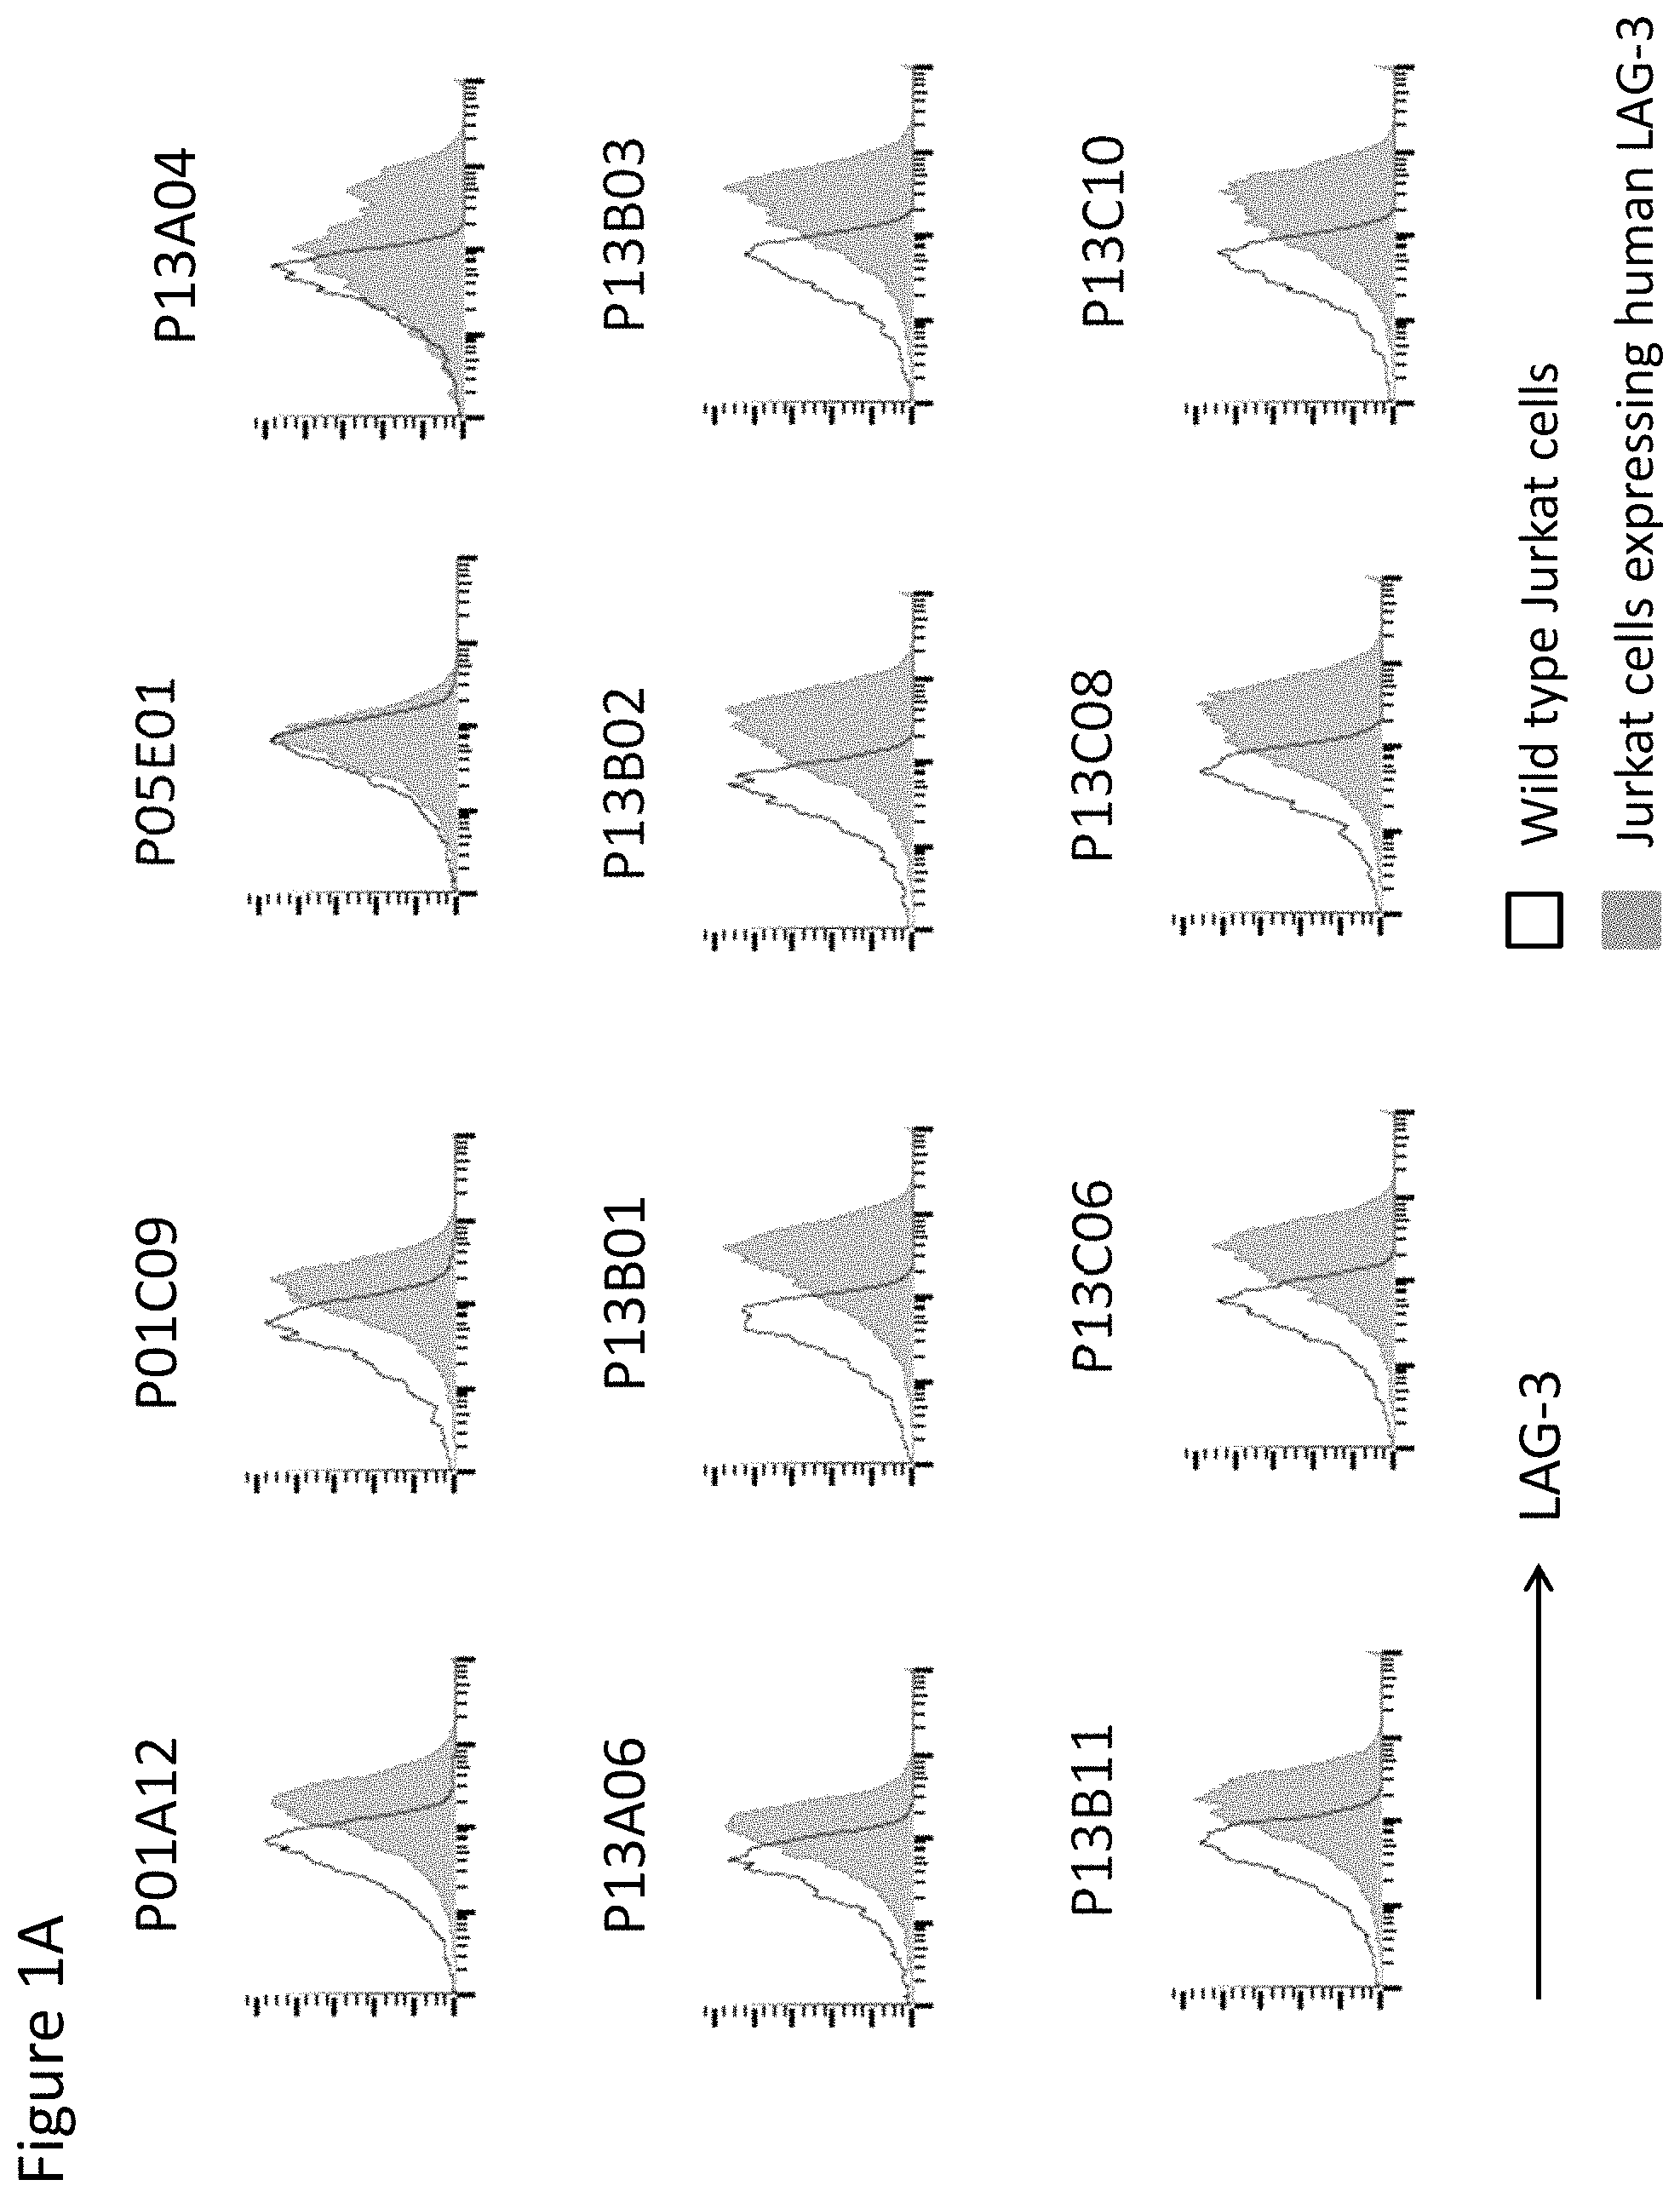 Anti-LAG-3 antibodies and methods of use thereof Patent Grant 